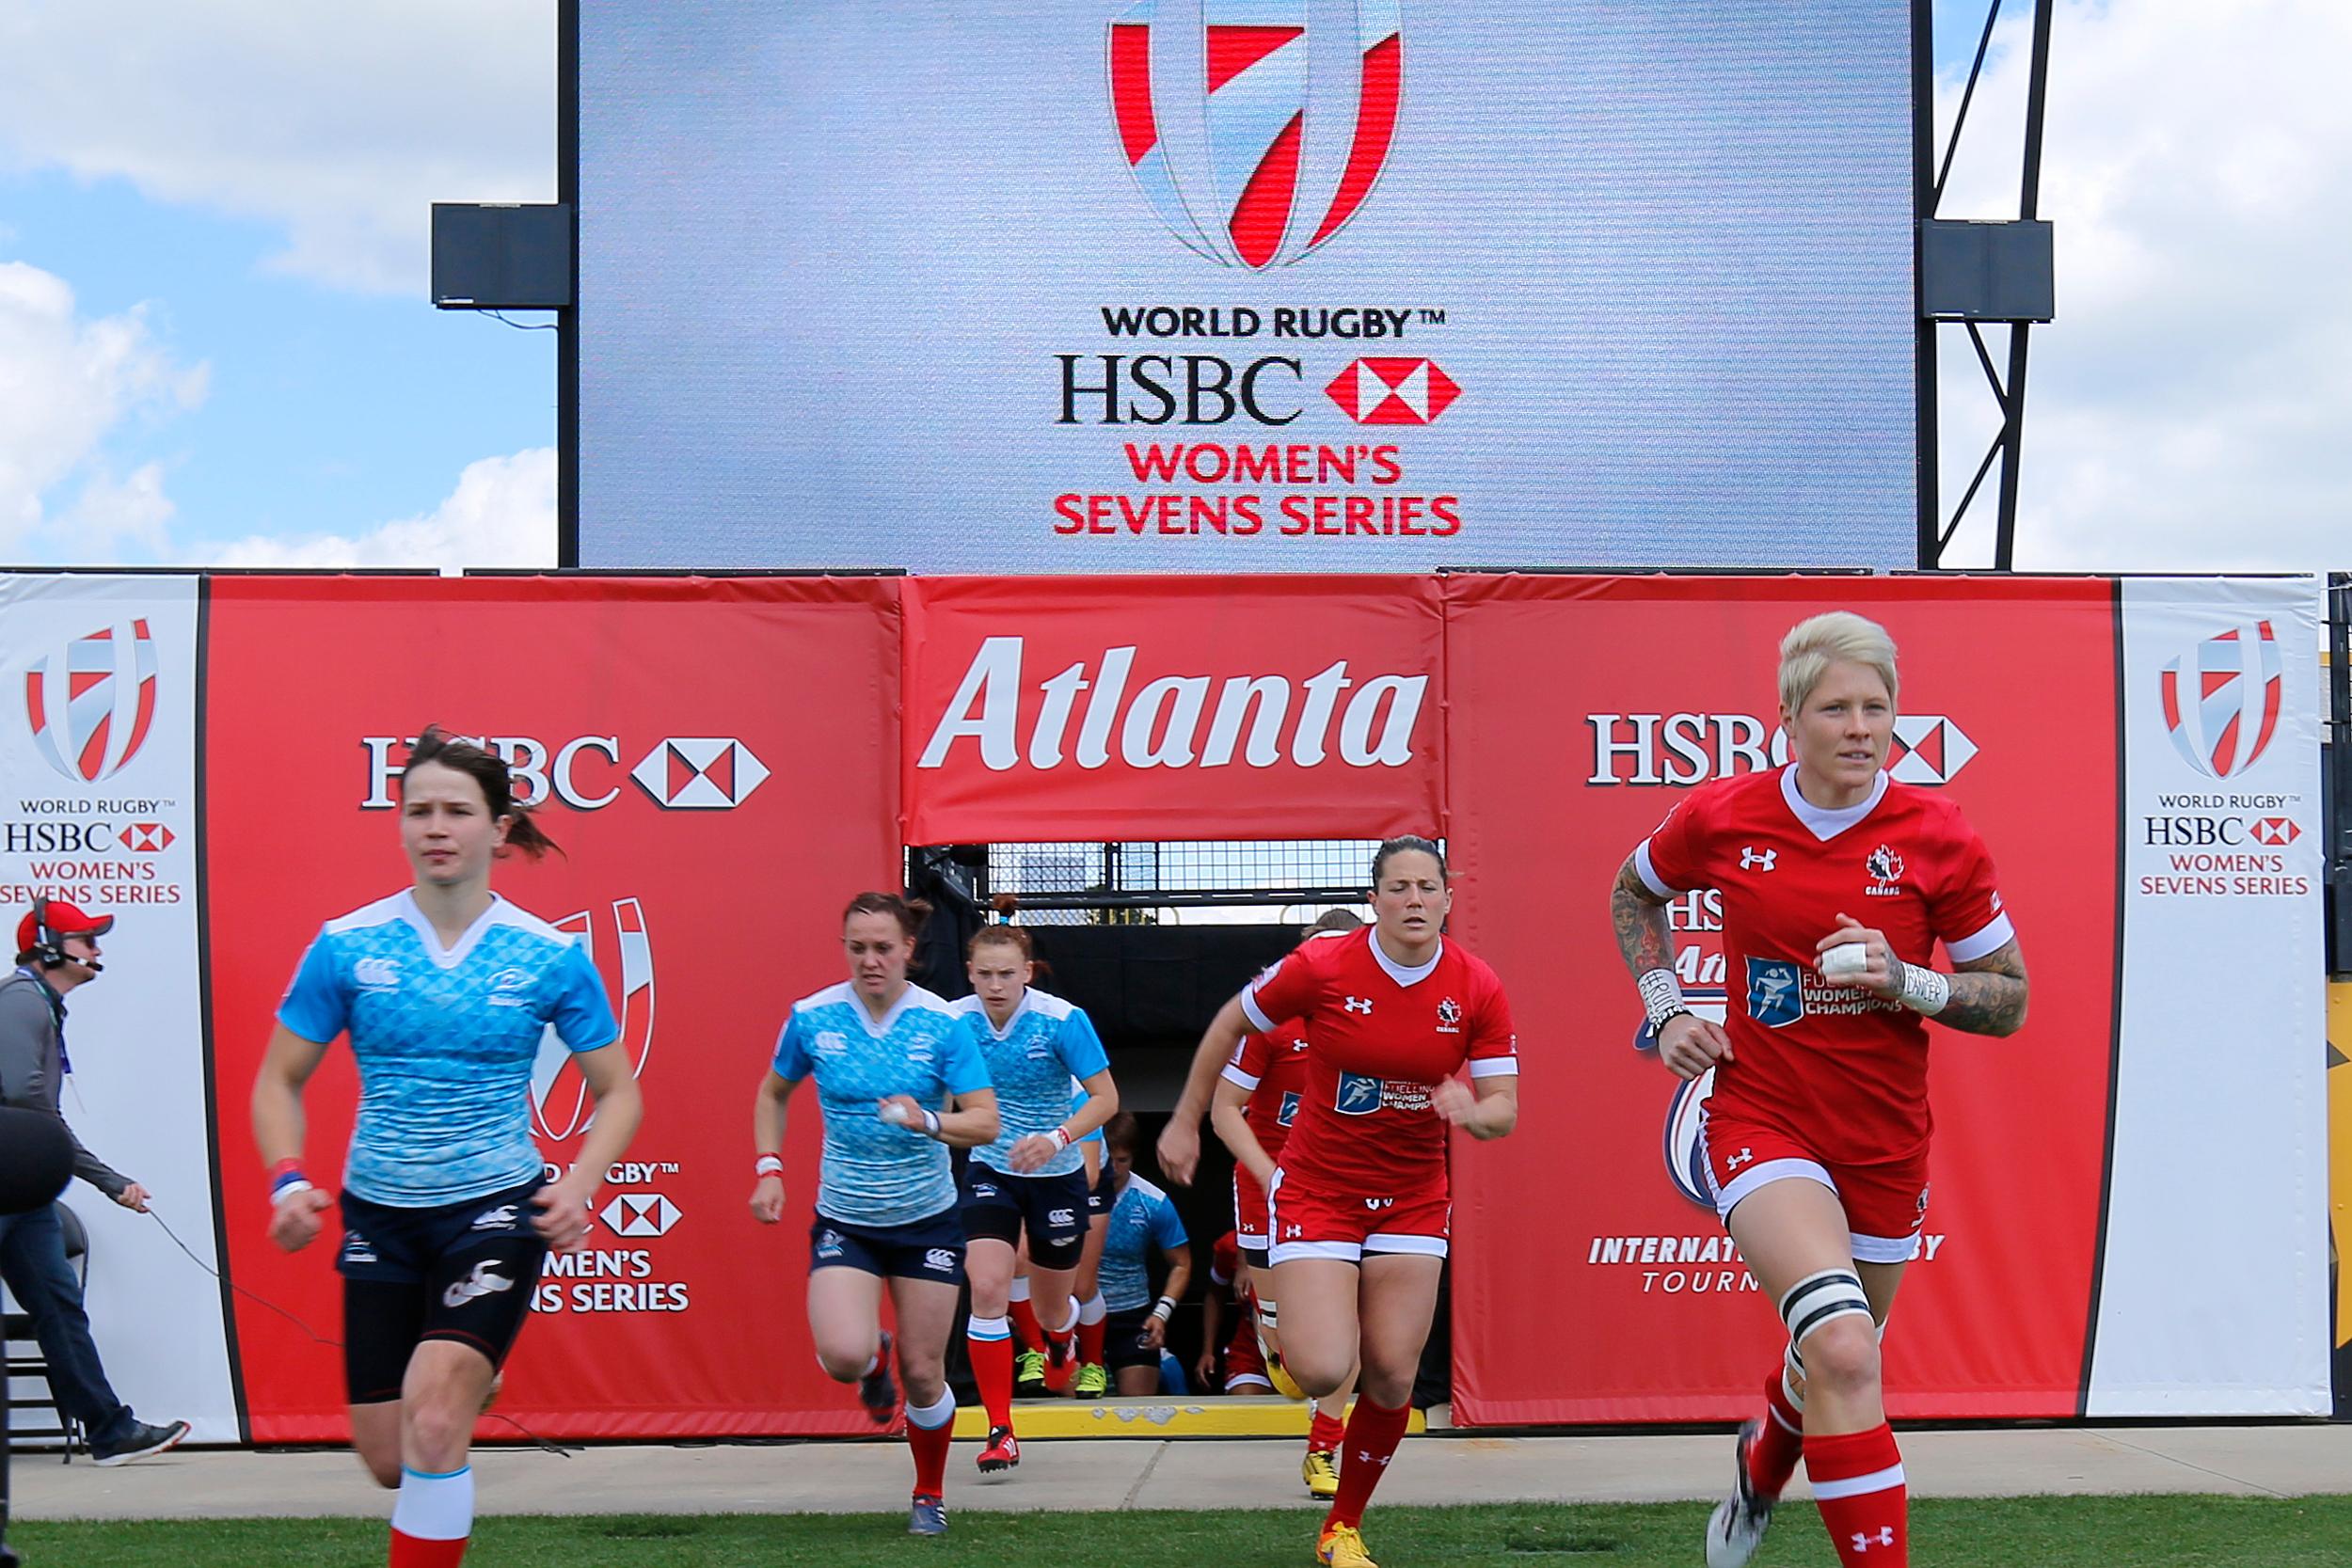 Canada and Russia take to the pitch at Atlanta 7s (Photo: Mike Lee @ KLC Fotos).